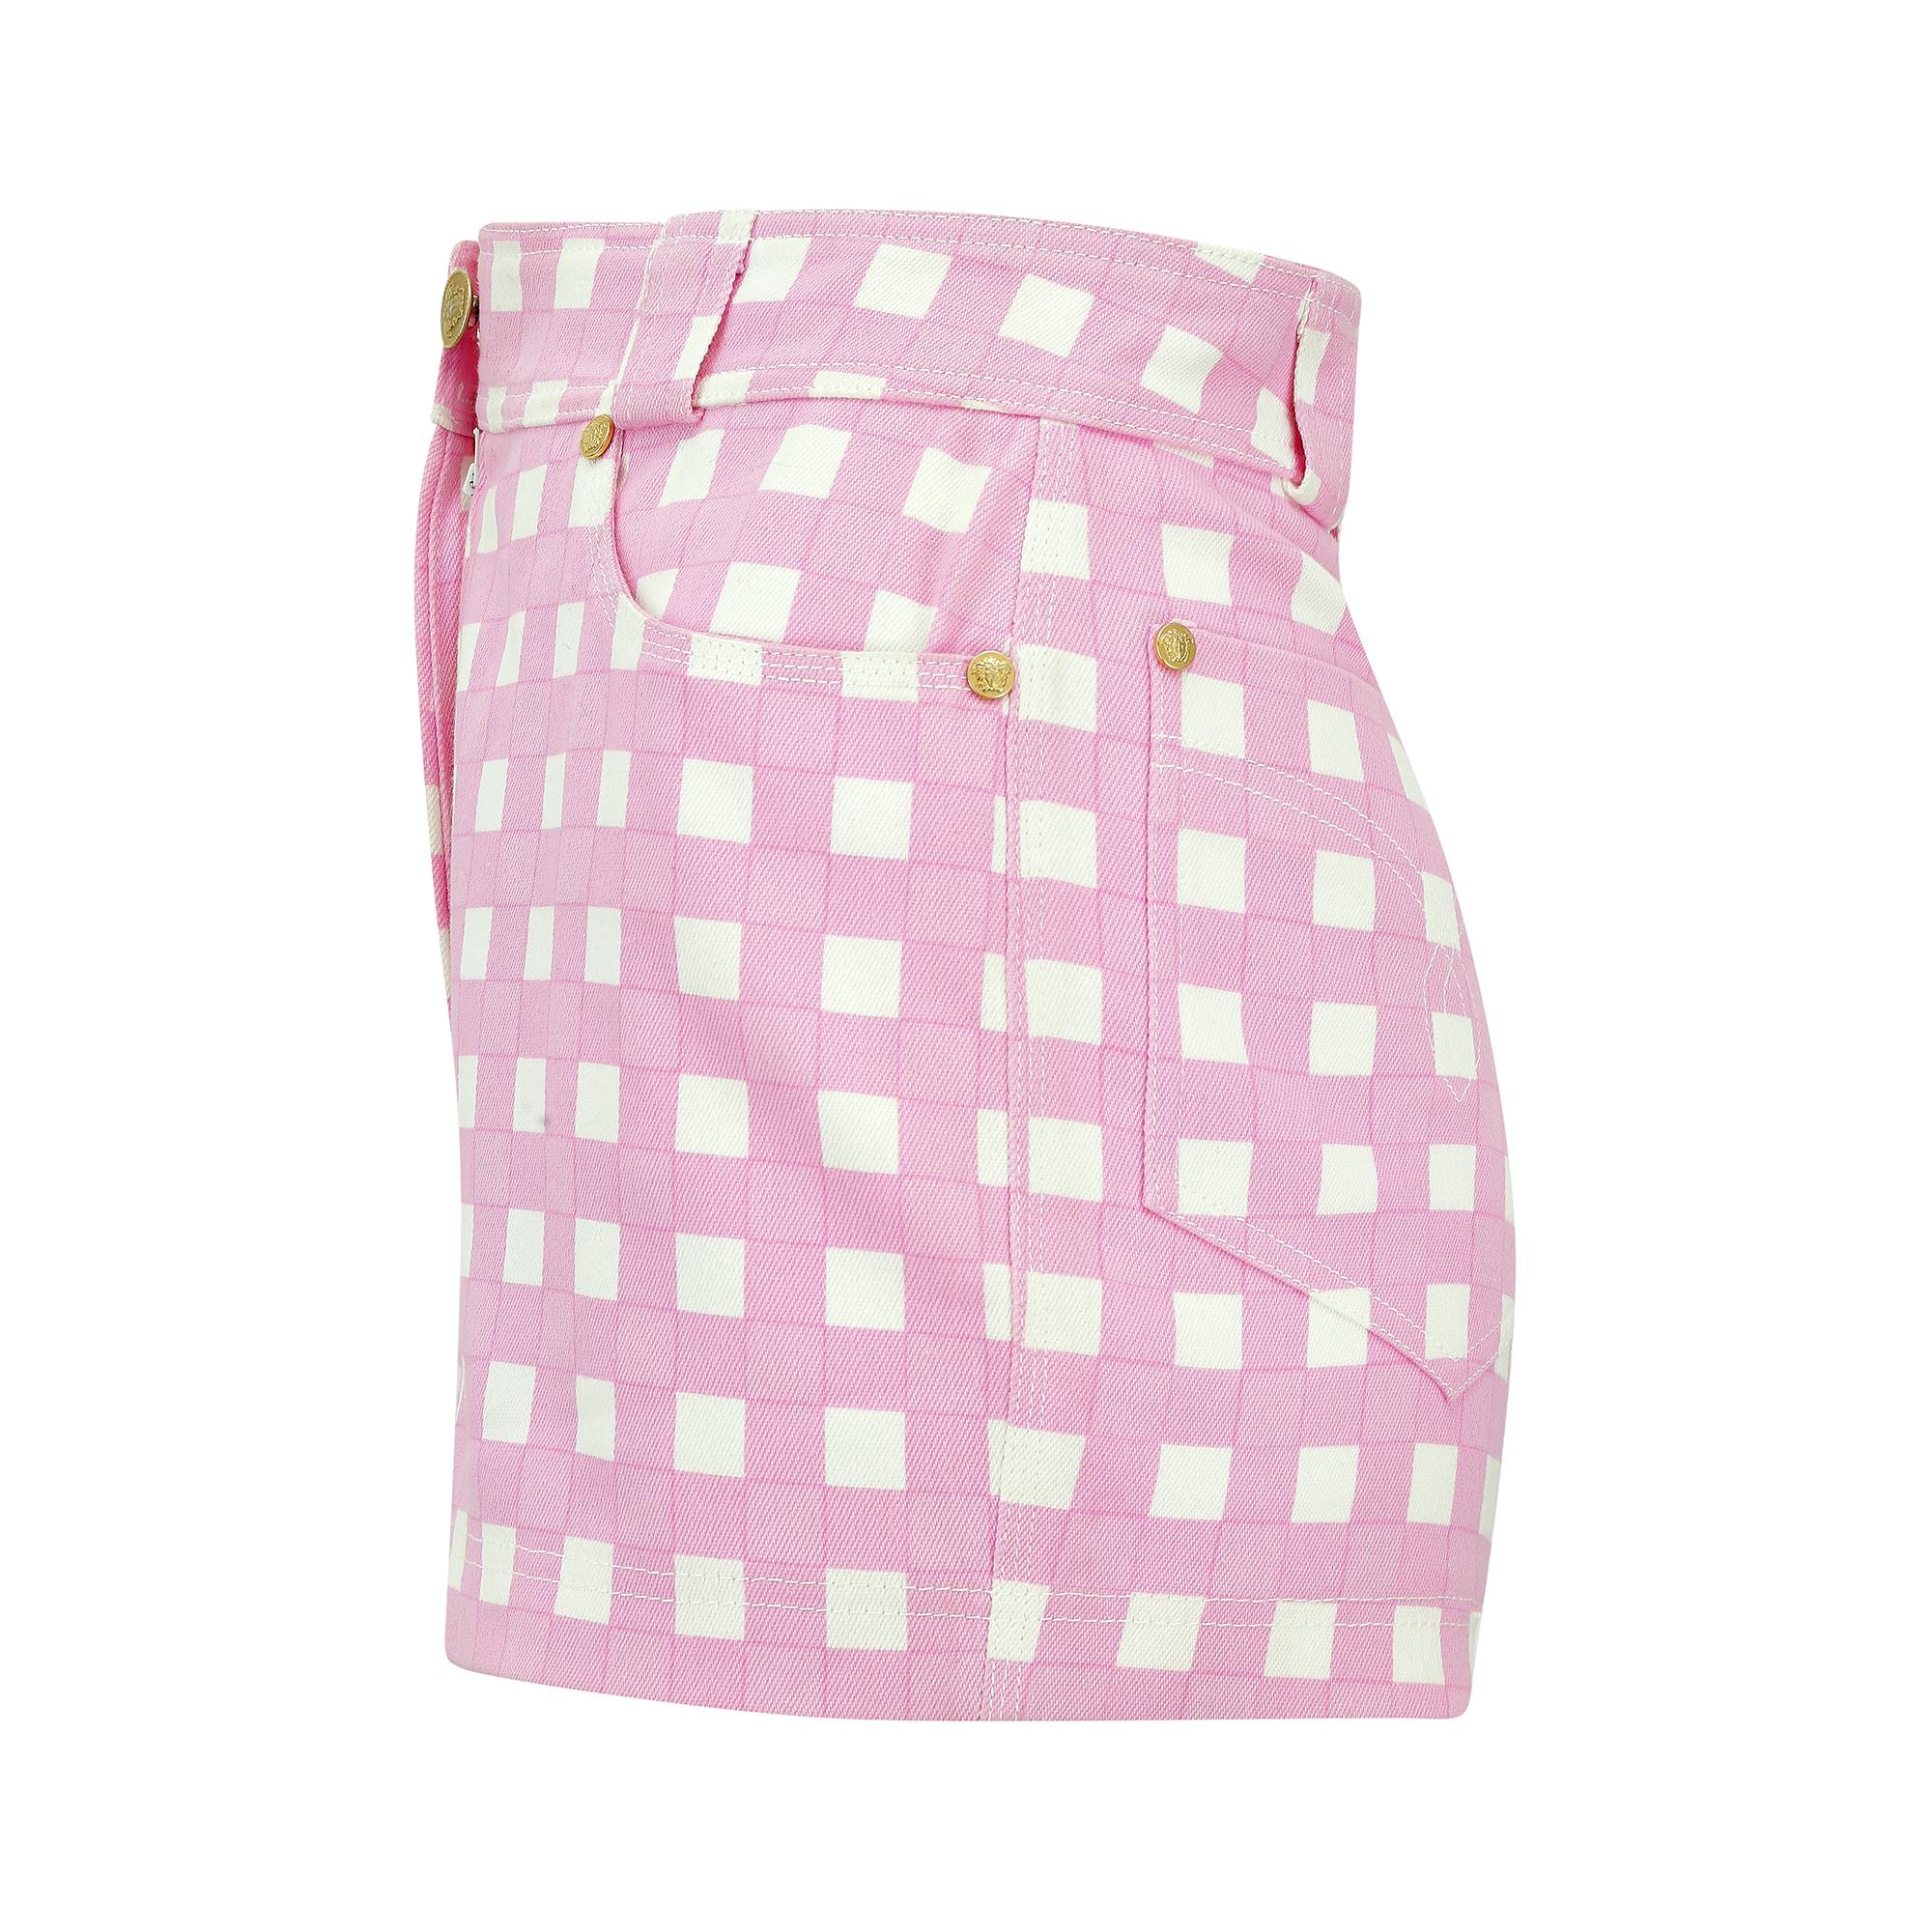 Purple 1993 Runway Gianni Versace Pink and White Gingham Shorts For Sale